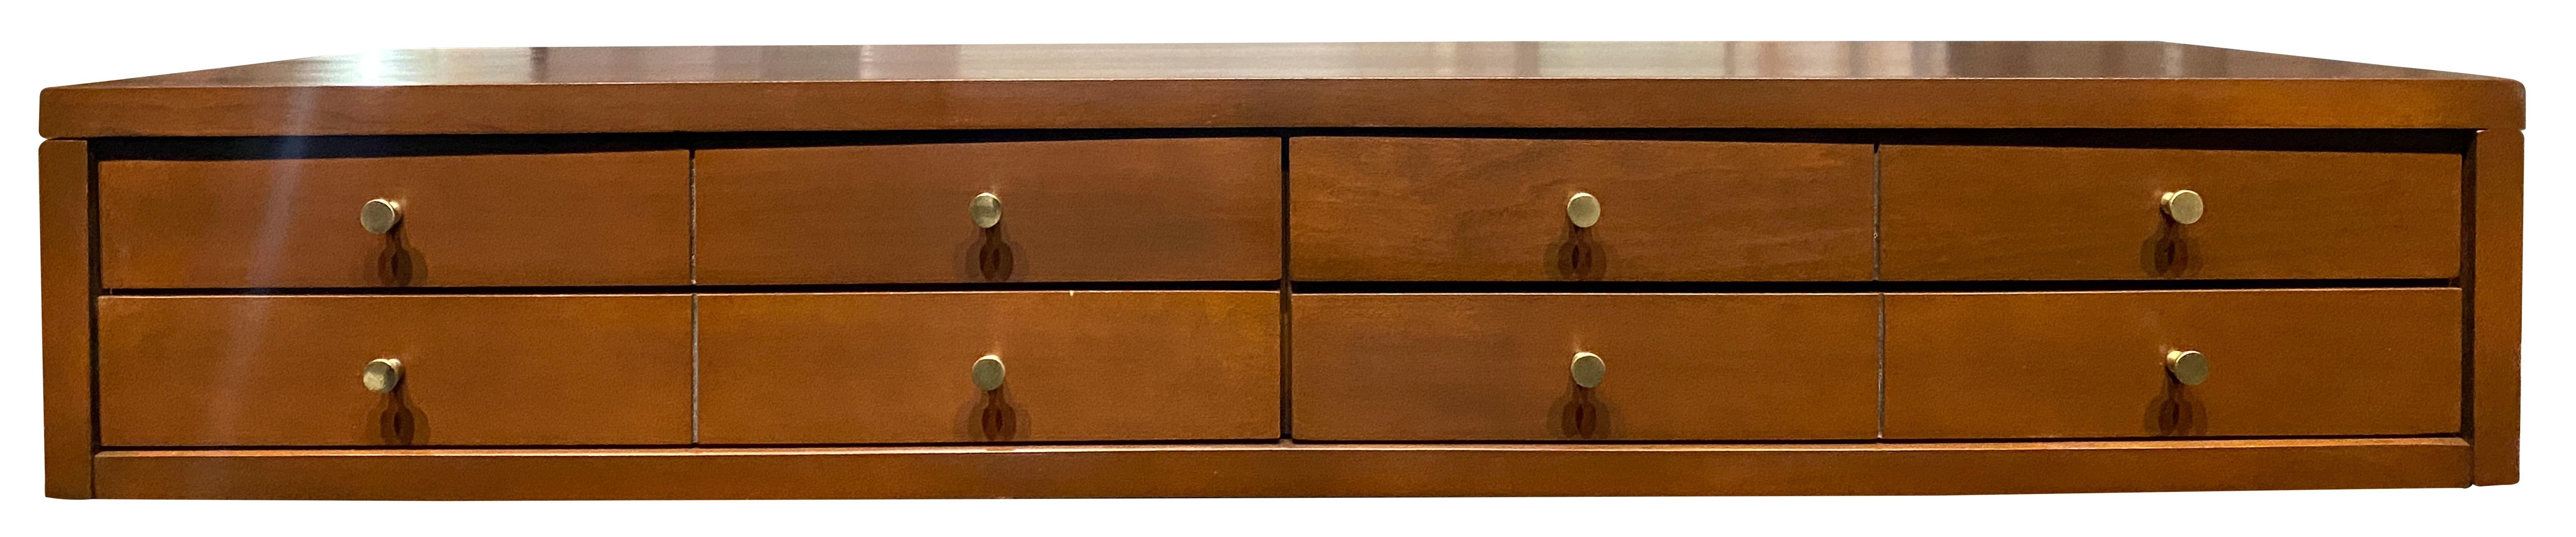 Nice Paul McCobb 3' small jewelry box in solid maple construction with brown finish. Very high quality construction with original brass pulls. Made for top of dresser or bookcase. 8 brass knobs 4 drawers. Planner Group, Winchendon Mass. Refinished